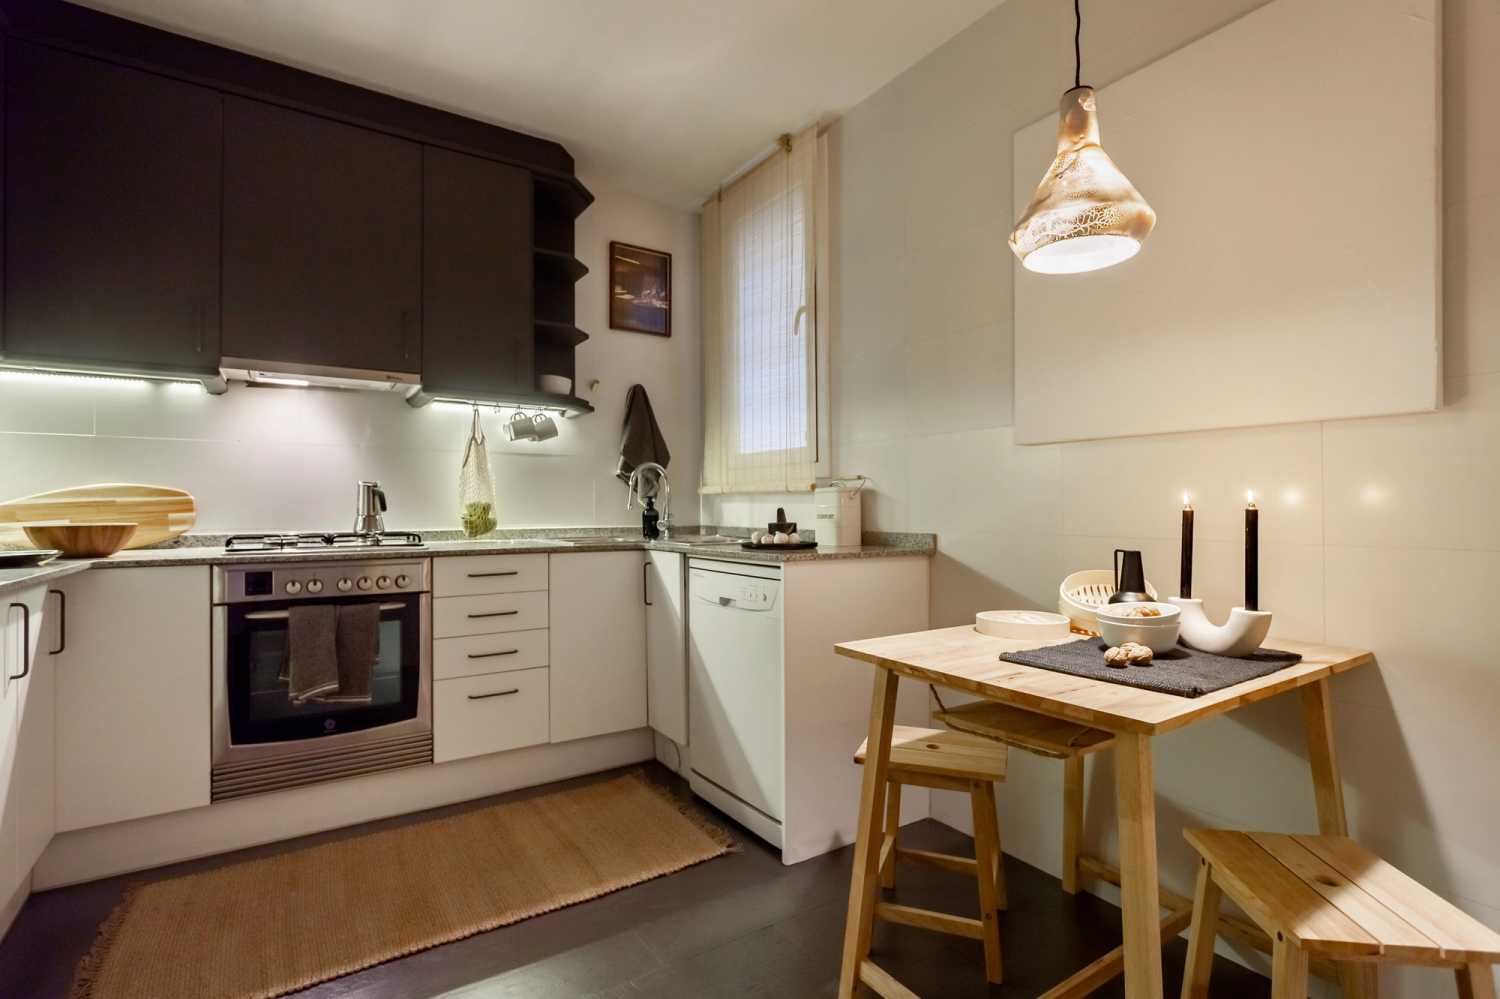 1653912591-ukio-barcelona-diagonal-big-kitchen-with-a-small-high-table-in-apartment.jpg